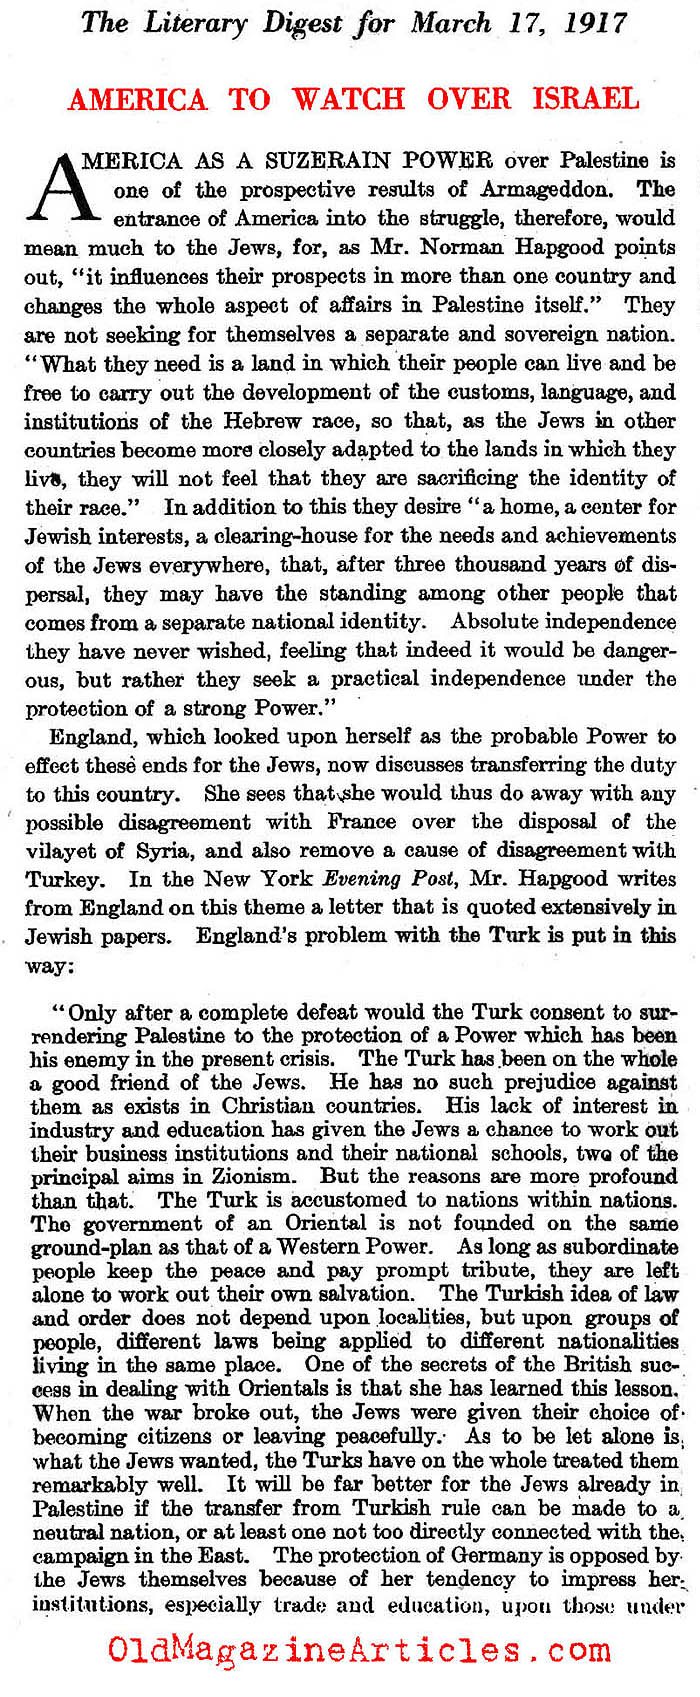 Anticipating America's Unique Relationship With Israel (Literary Digest, 1917)